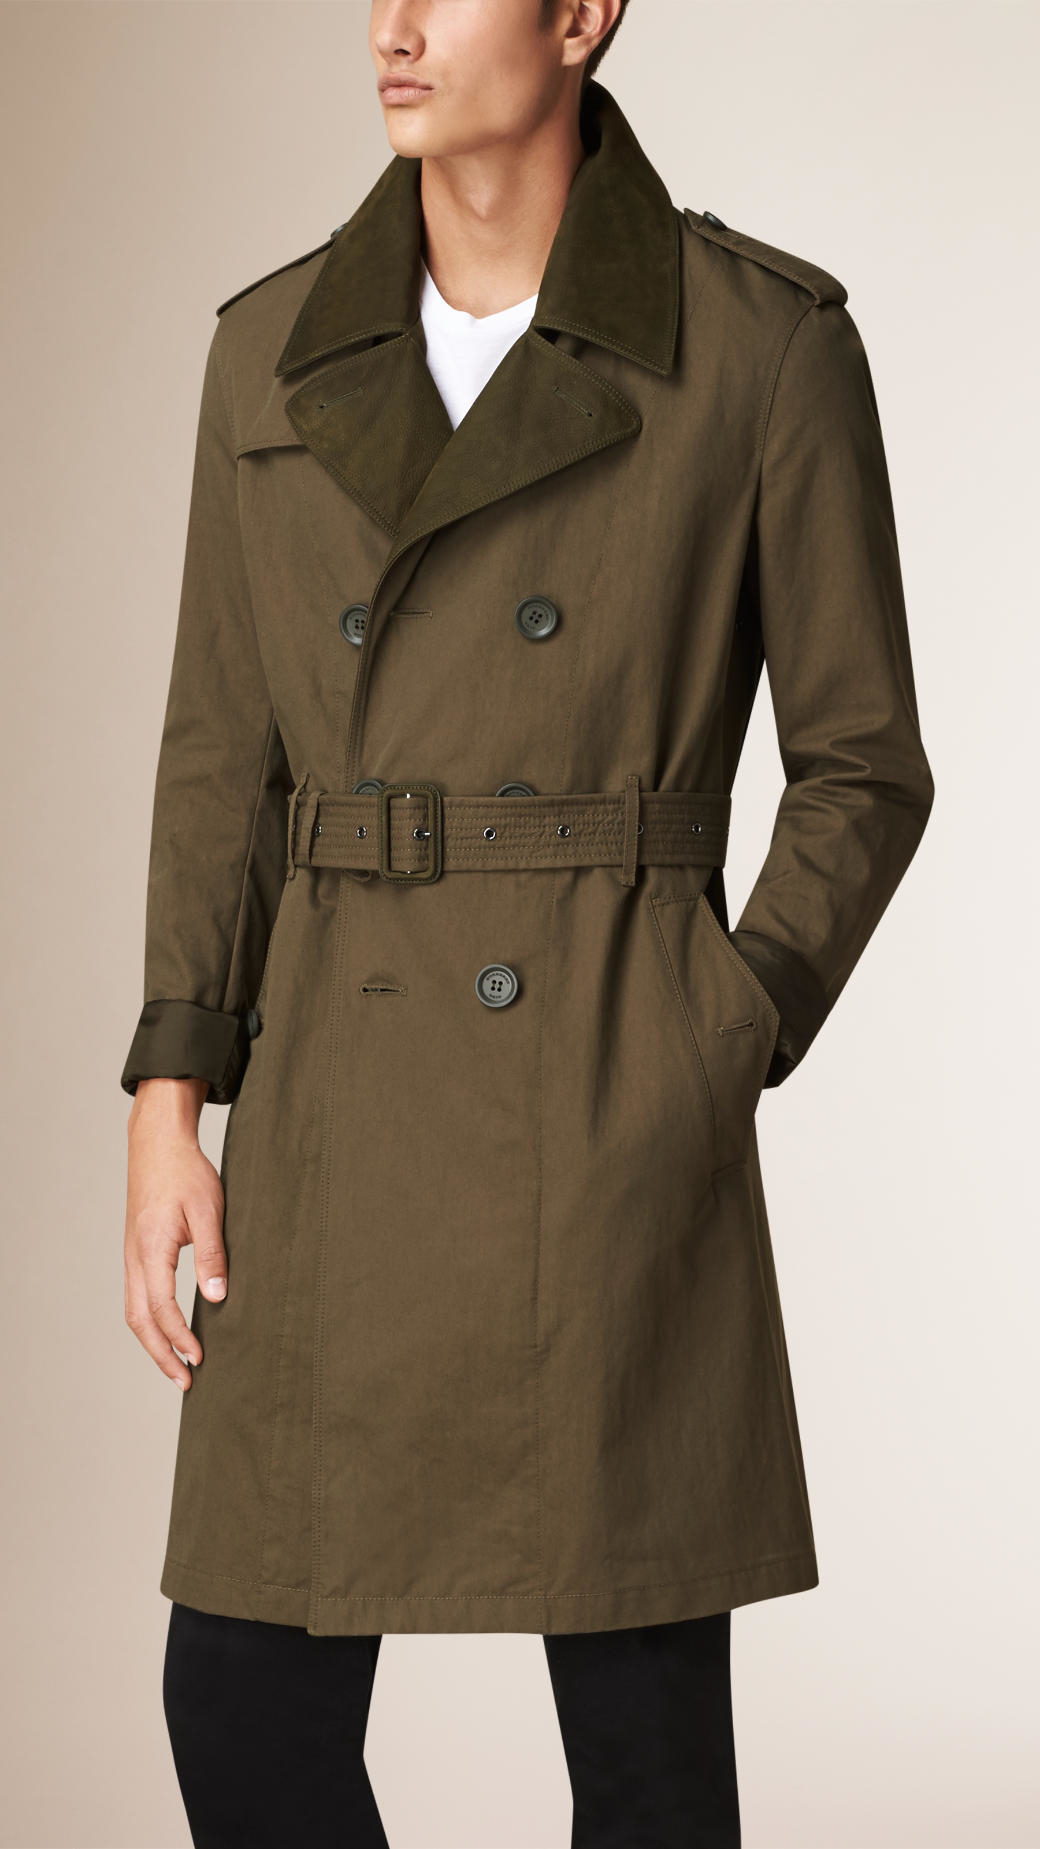 Lyst - Burberry Nubuck Trim Technical Cotton Trench Coat in Natural for Men